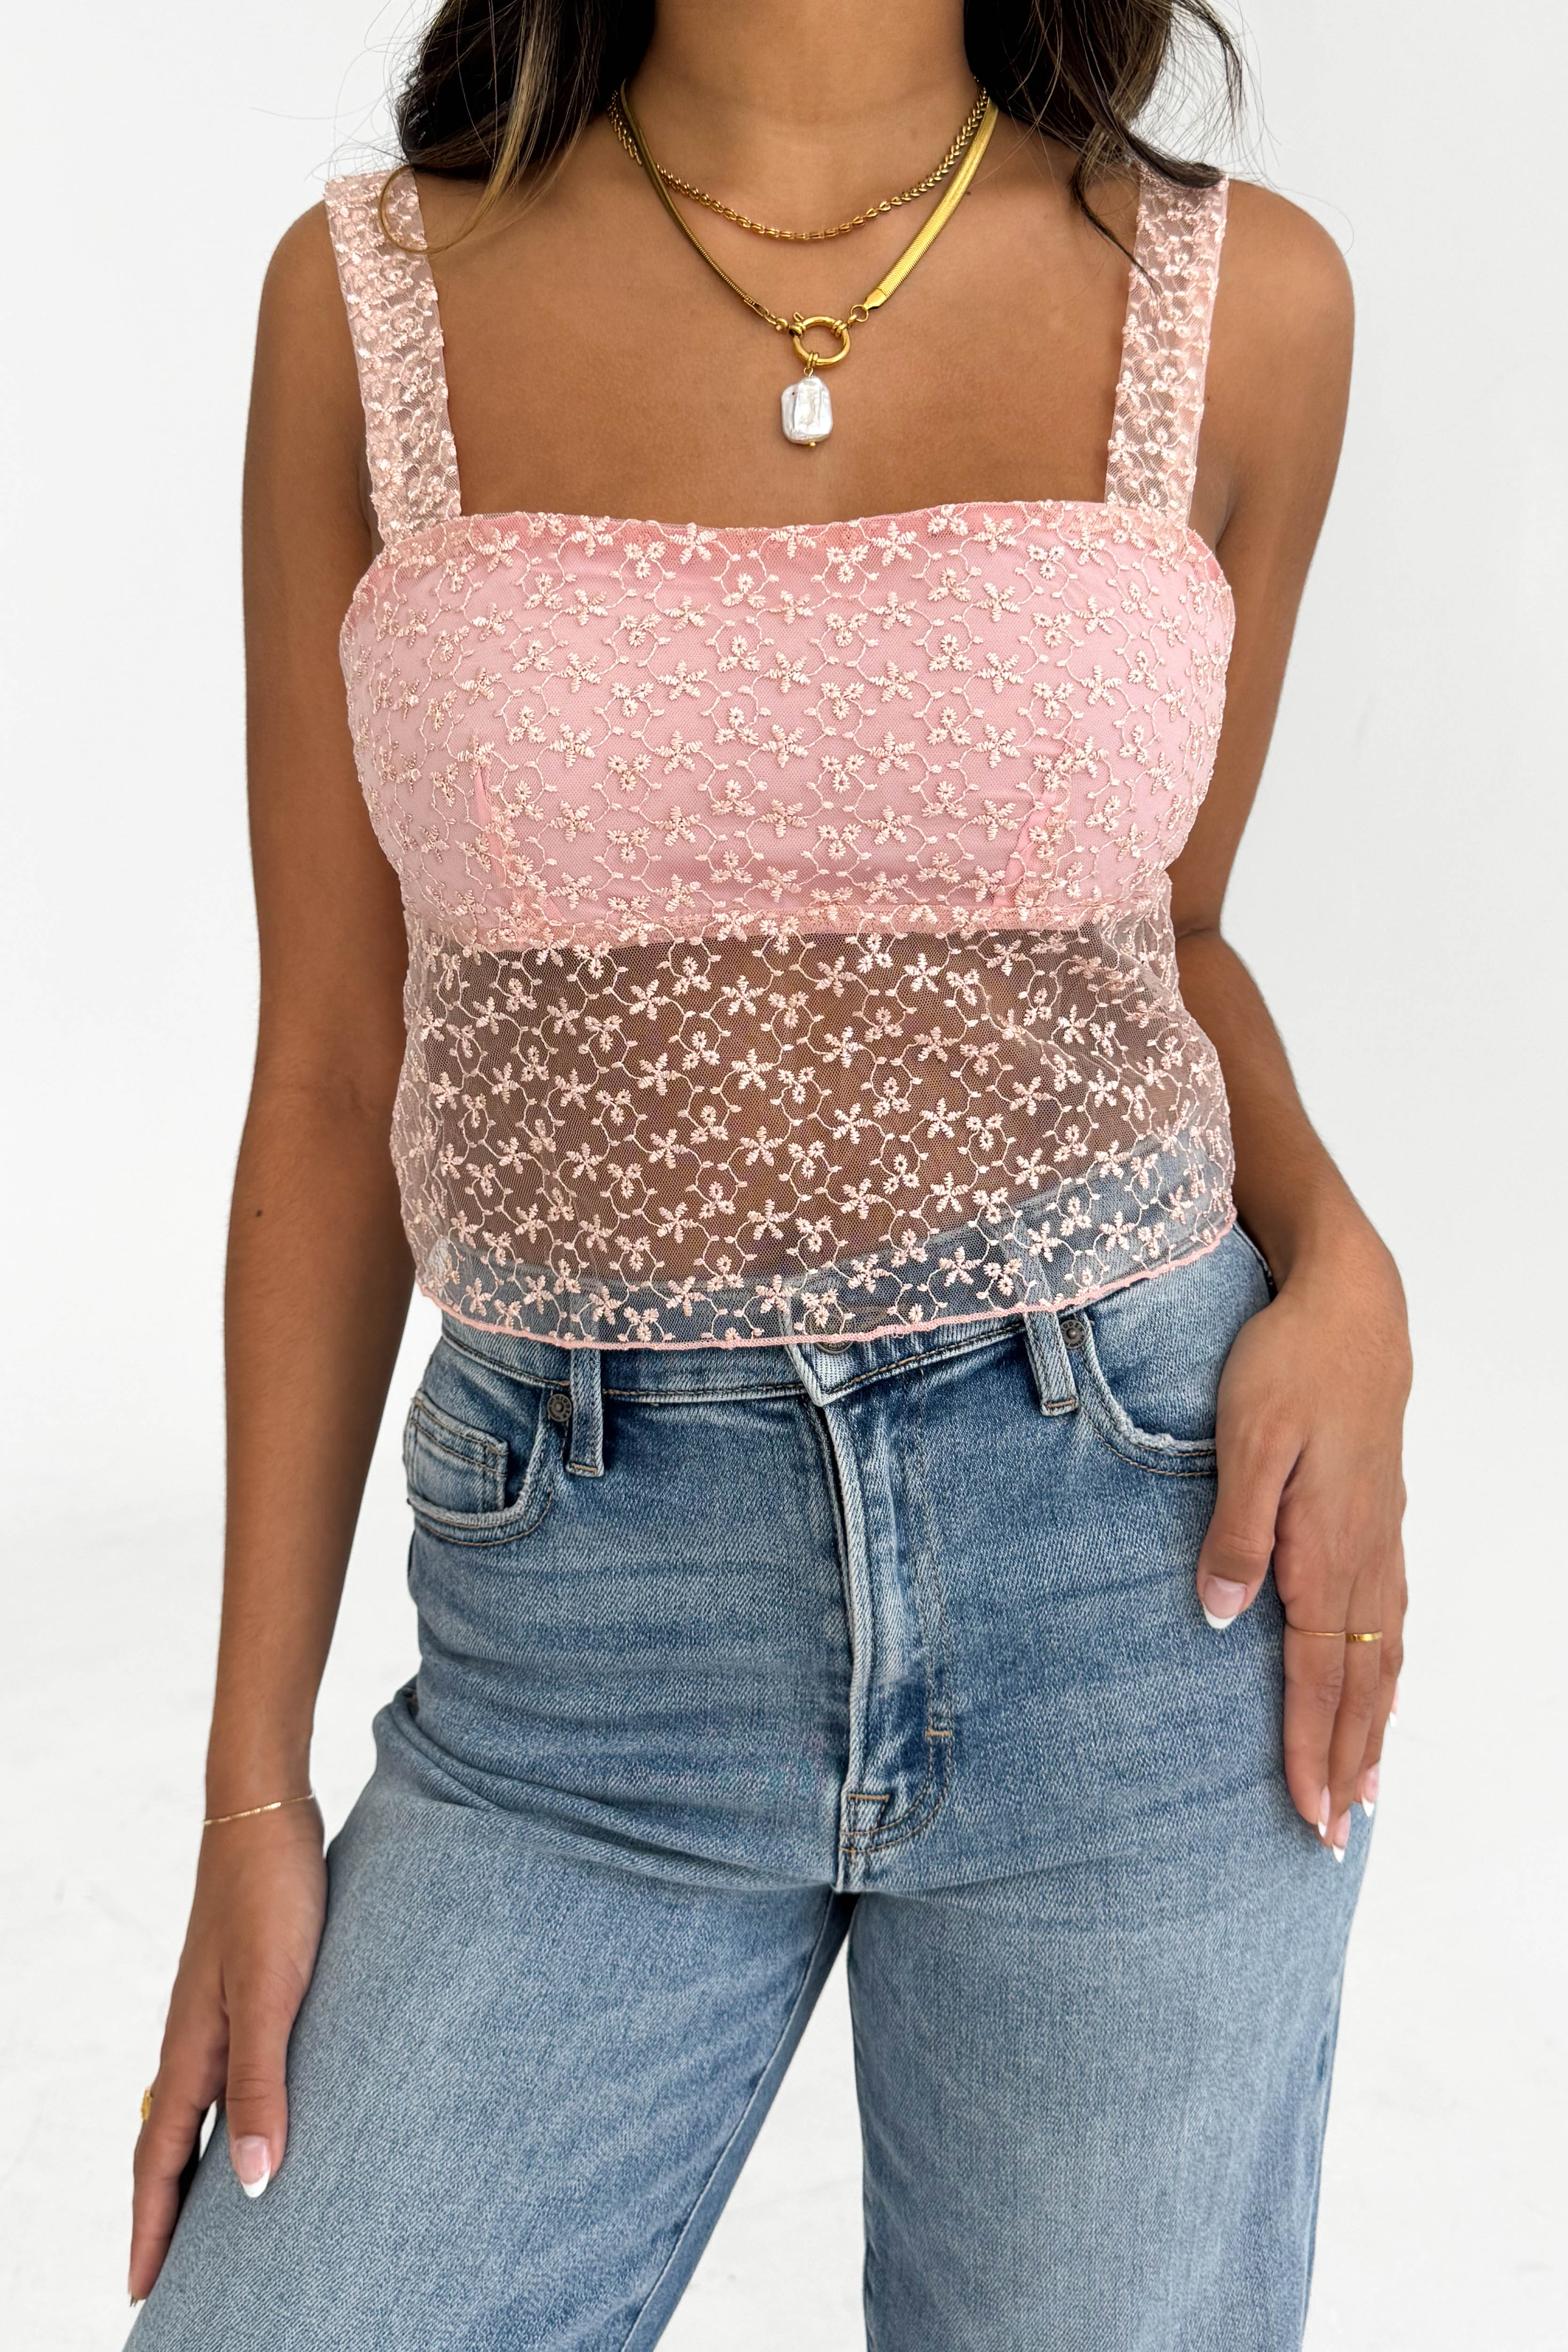 Adore You Top in Blush